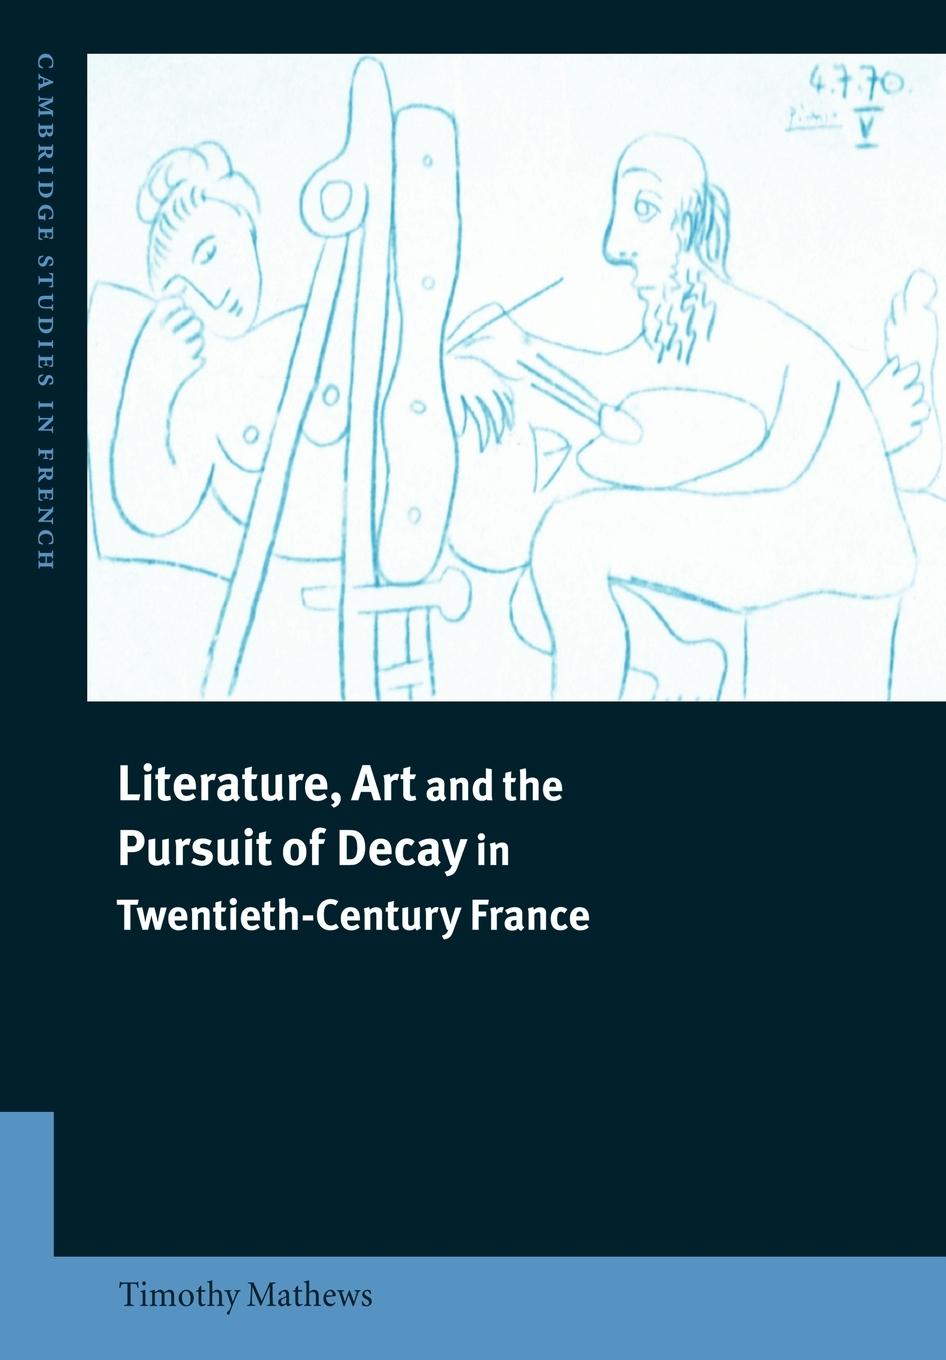 Literature, Art and the Pursuit of Decay in Twentieth-Century France - Mathews, Timothy Timothy, Mathews